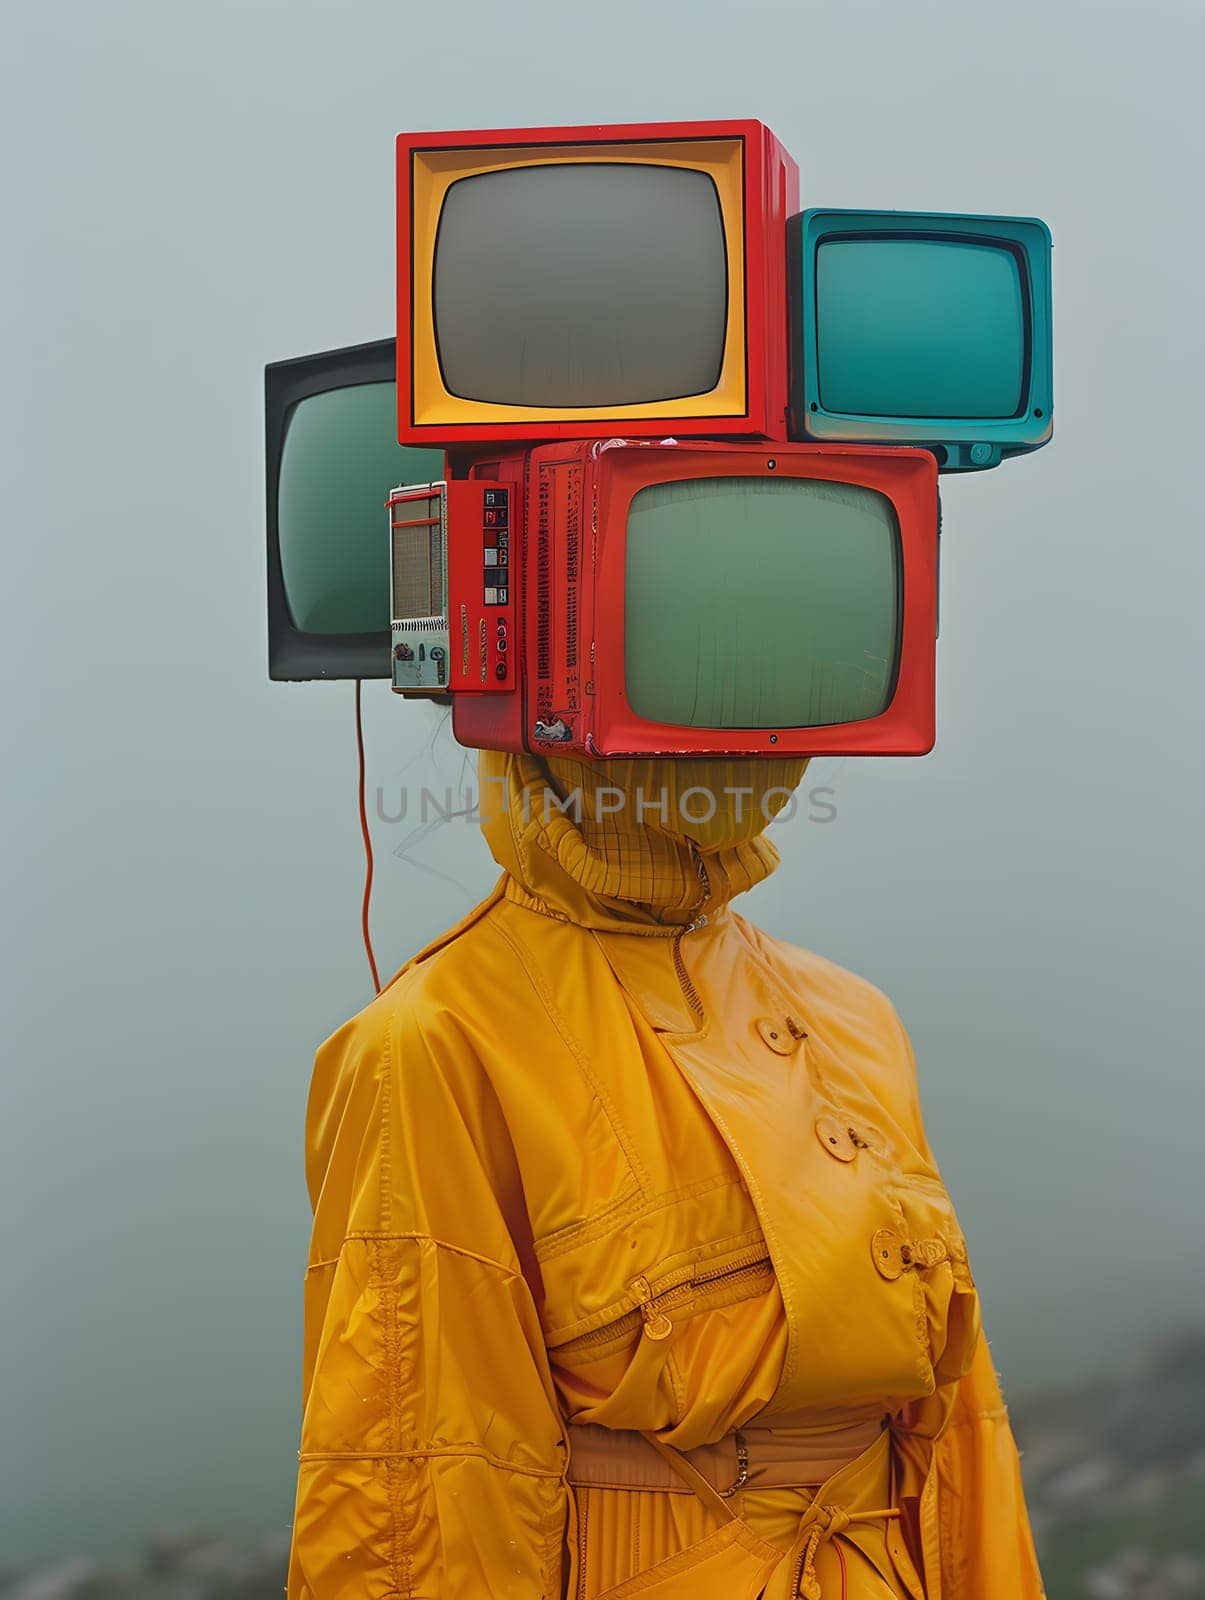 A person in highvisibility yellow workwear with cameras and gadgets attached to their head, resembling a cluster of televisions. The outfit includes protective equipment and automotive lighting